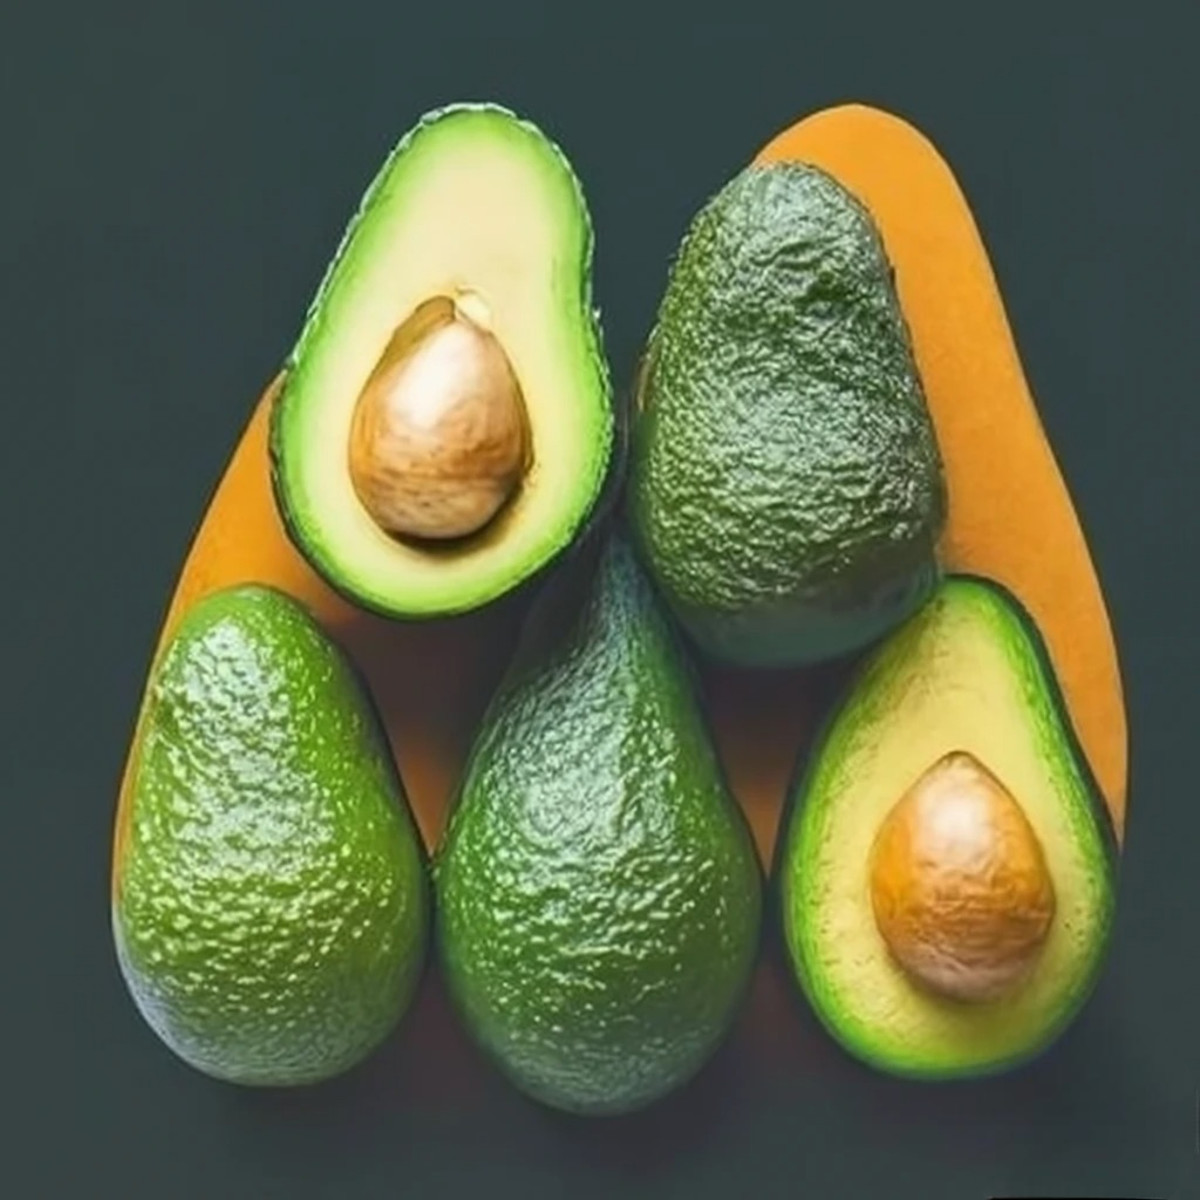 Are Avocado Seeds Edible? Revealing Truths and Exploring Their Diverse Uses